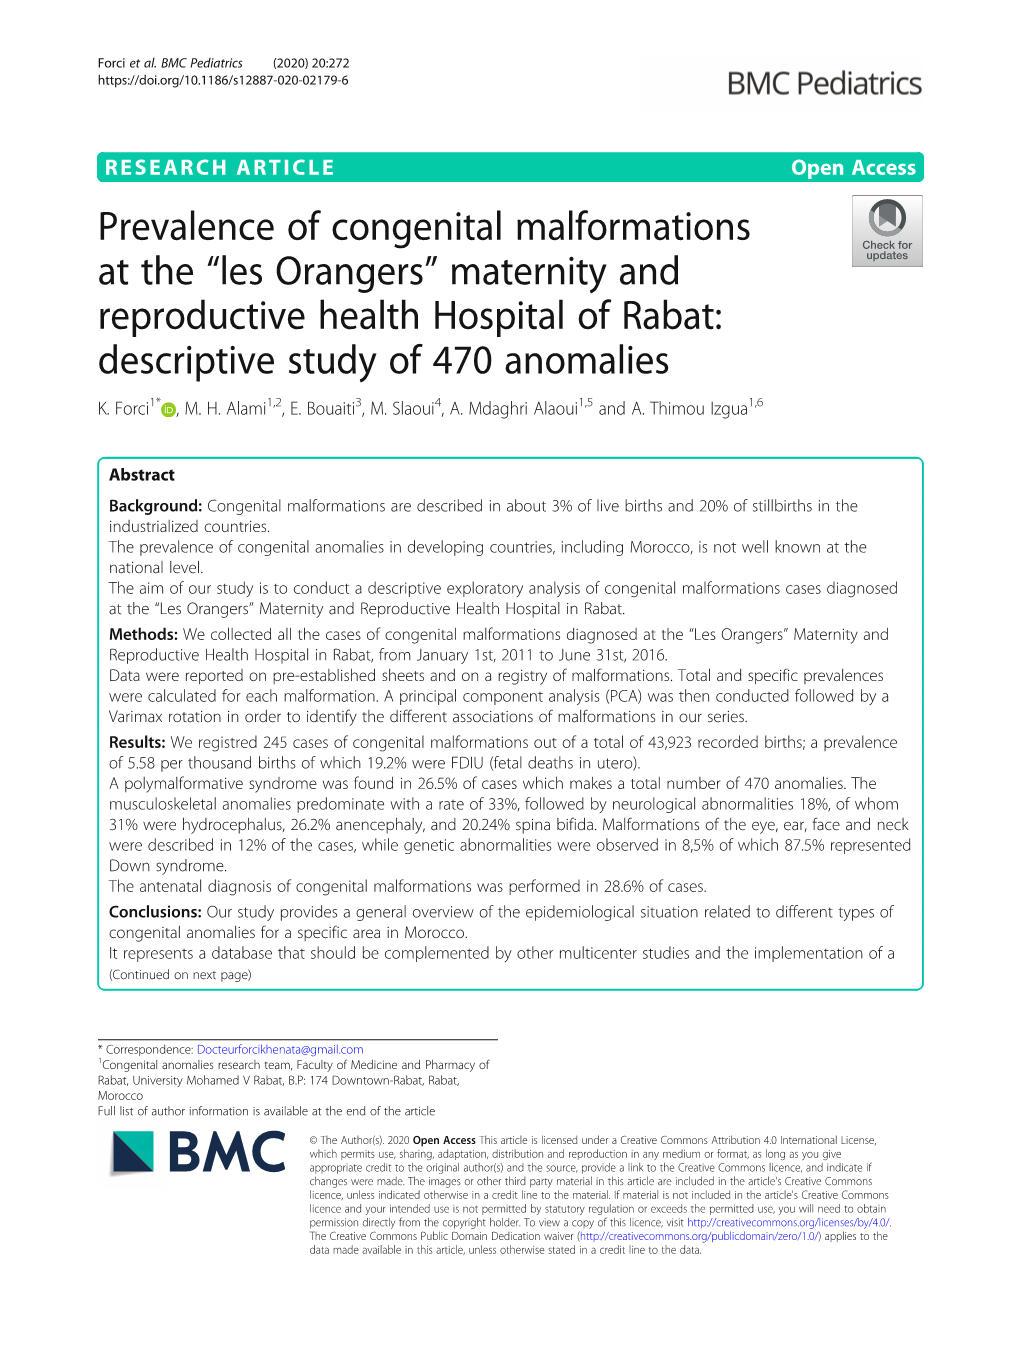 Prevalence of Congenital Malformations at the “Les Orangers” Maternity and Reproductive Health Hospital of Rabat: Descriptive Study of 470 Anomalies K